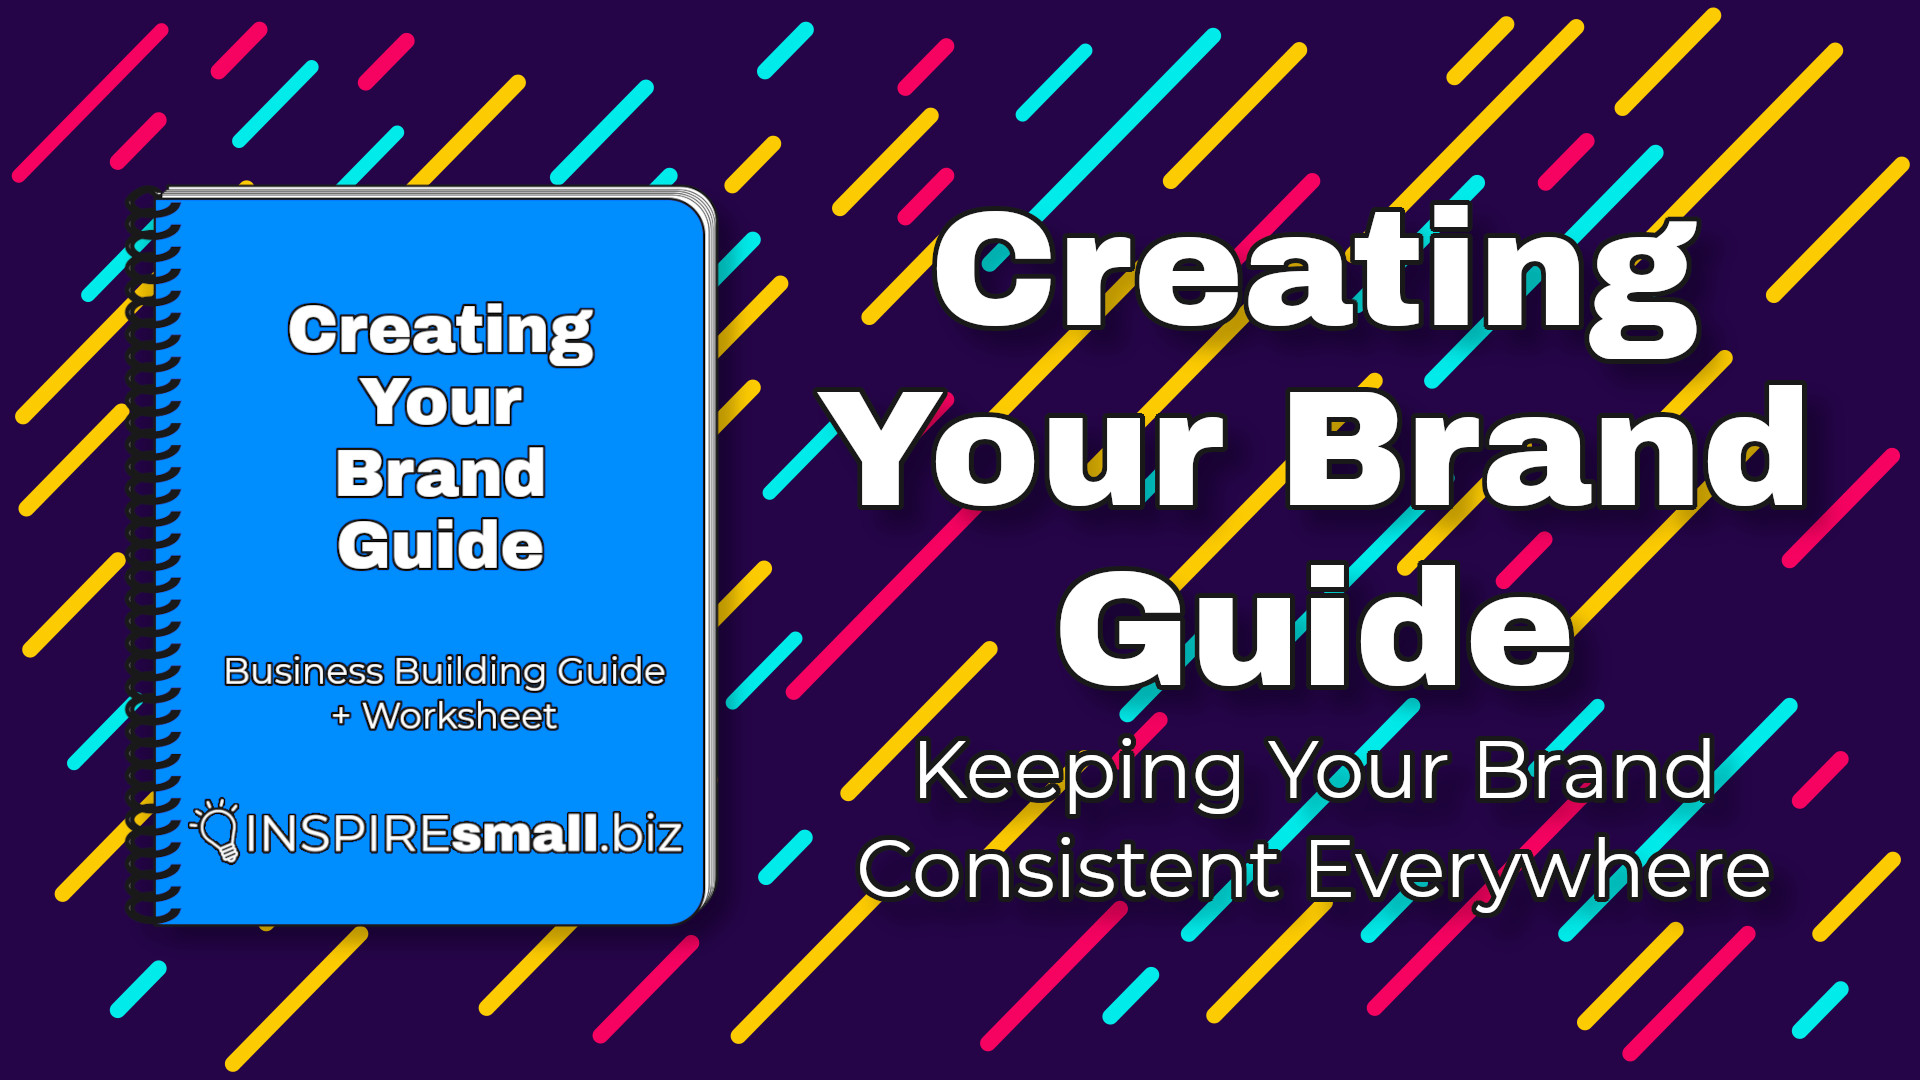 Creating Your Brand Guide - Keeping Your Brand Consistent Everywhere - a recorded presentation from INSPIREsmall.biz